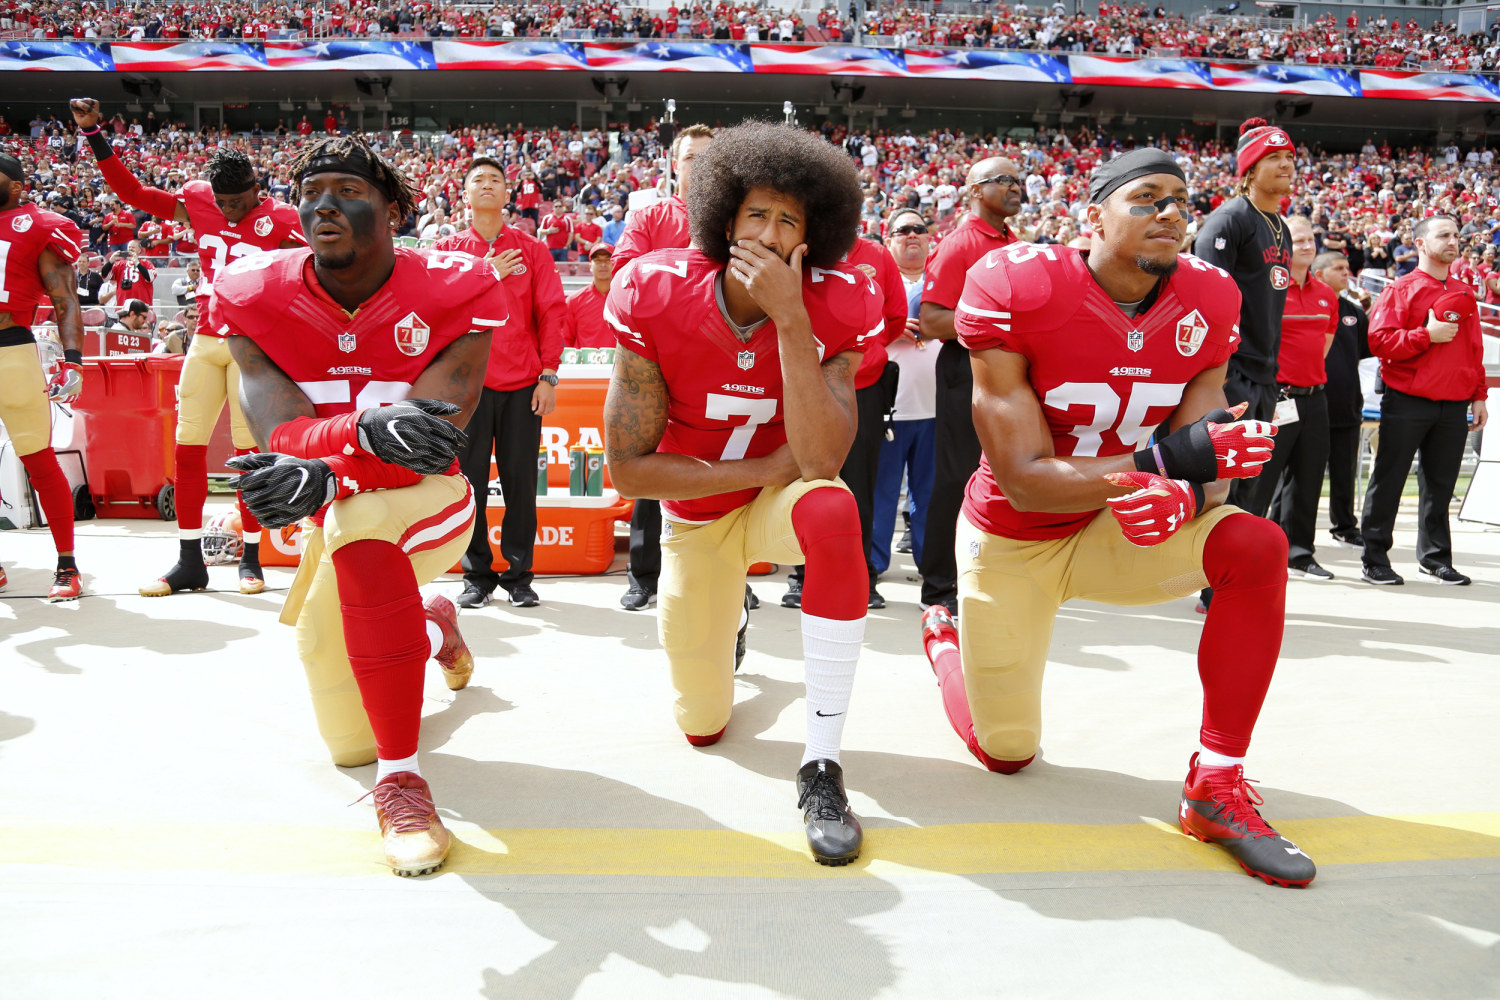 NBC/WSJ poll: Majority say kneeling during anthem 'not appropriate'